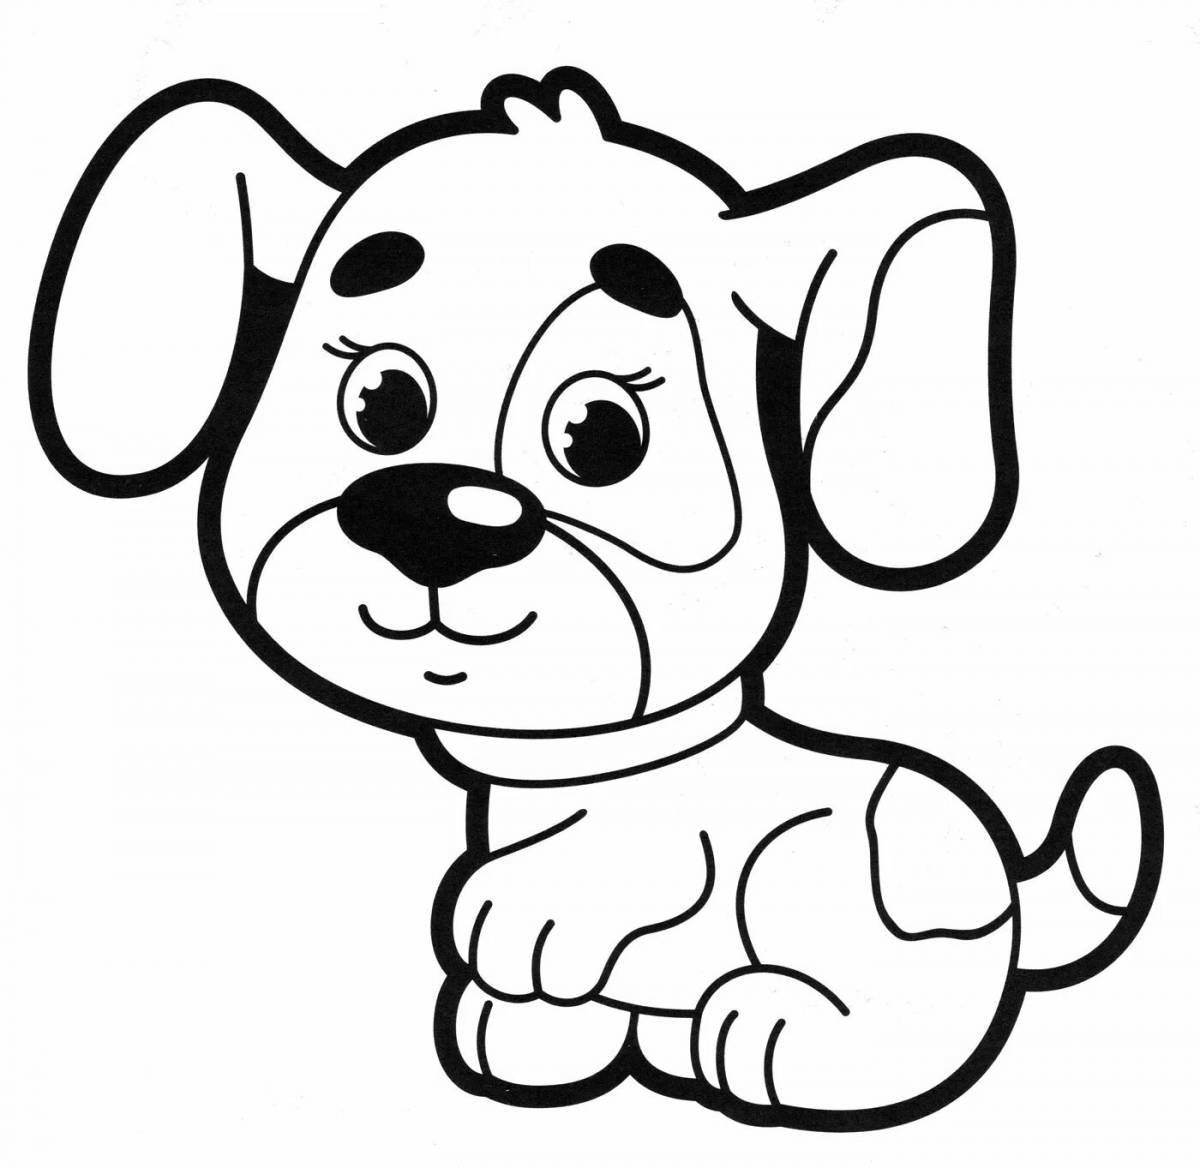 Sweet dog coloring book for kids